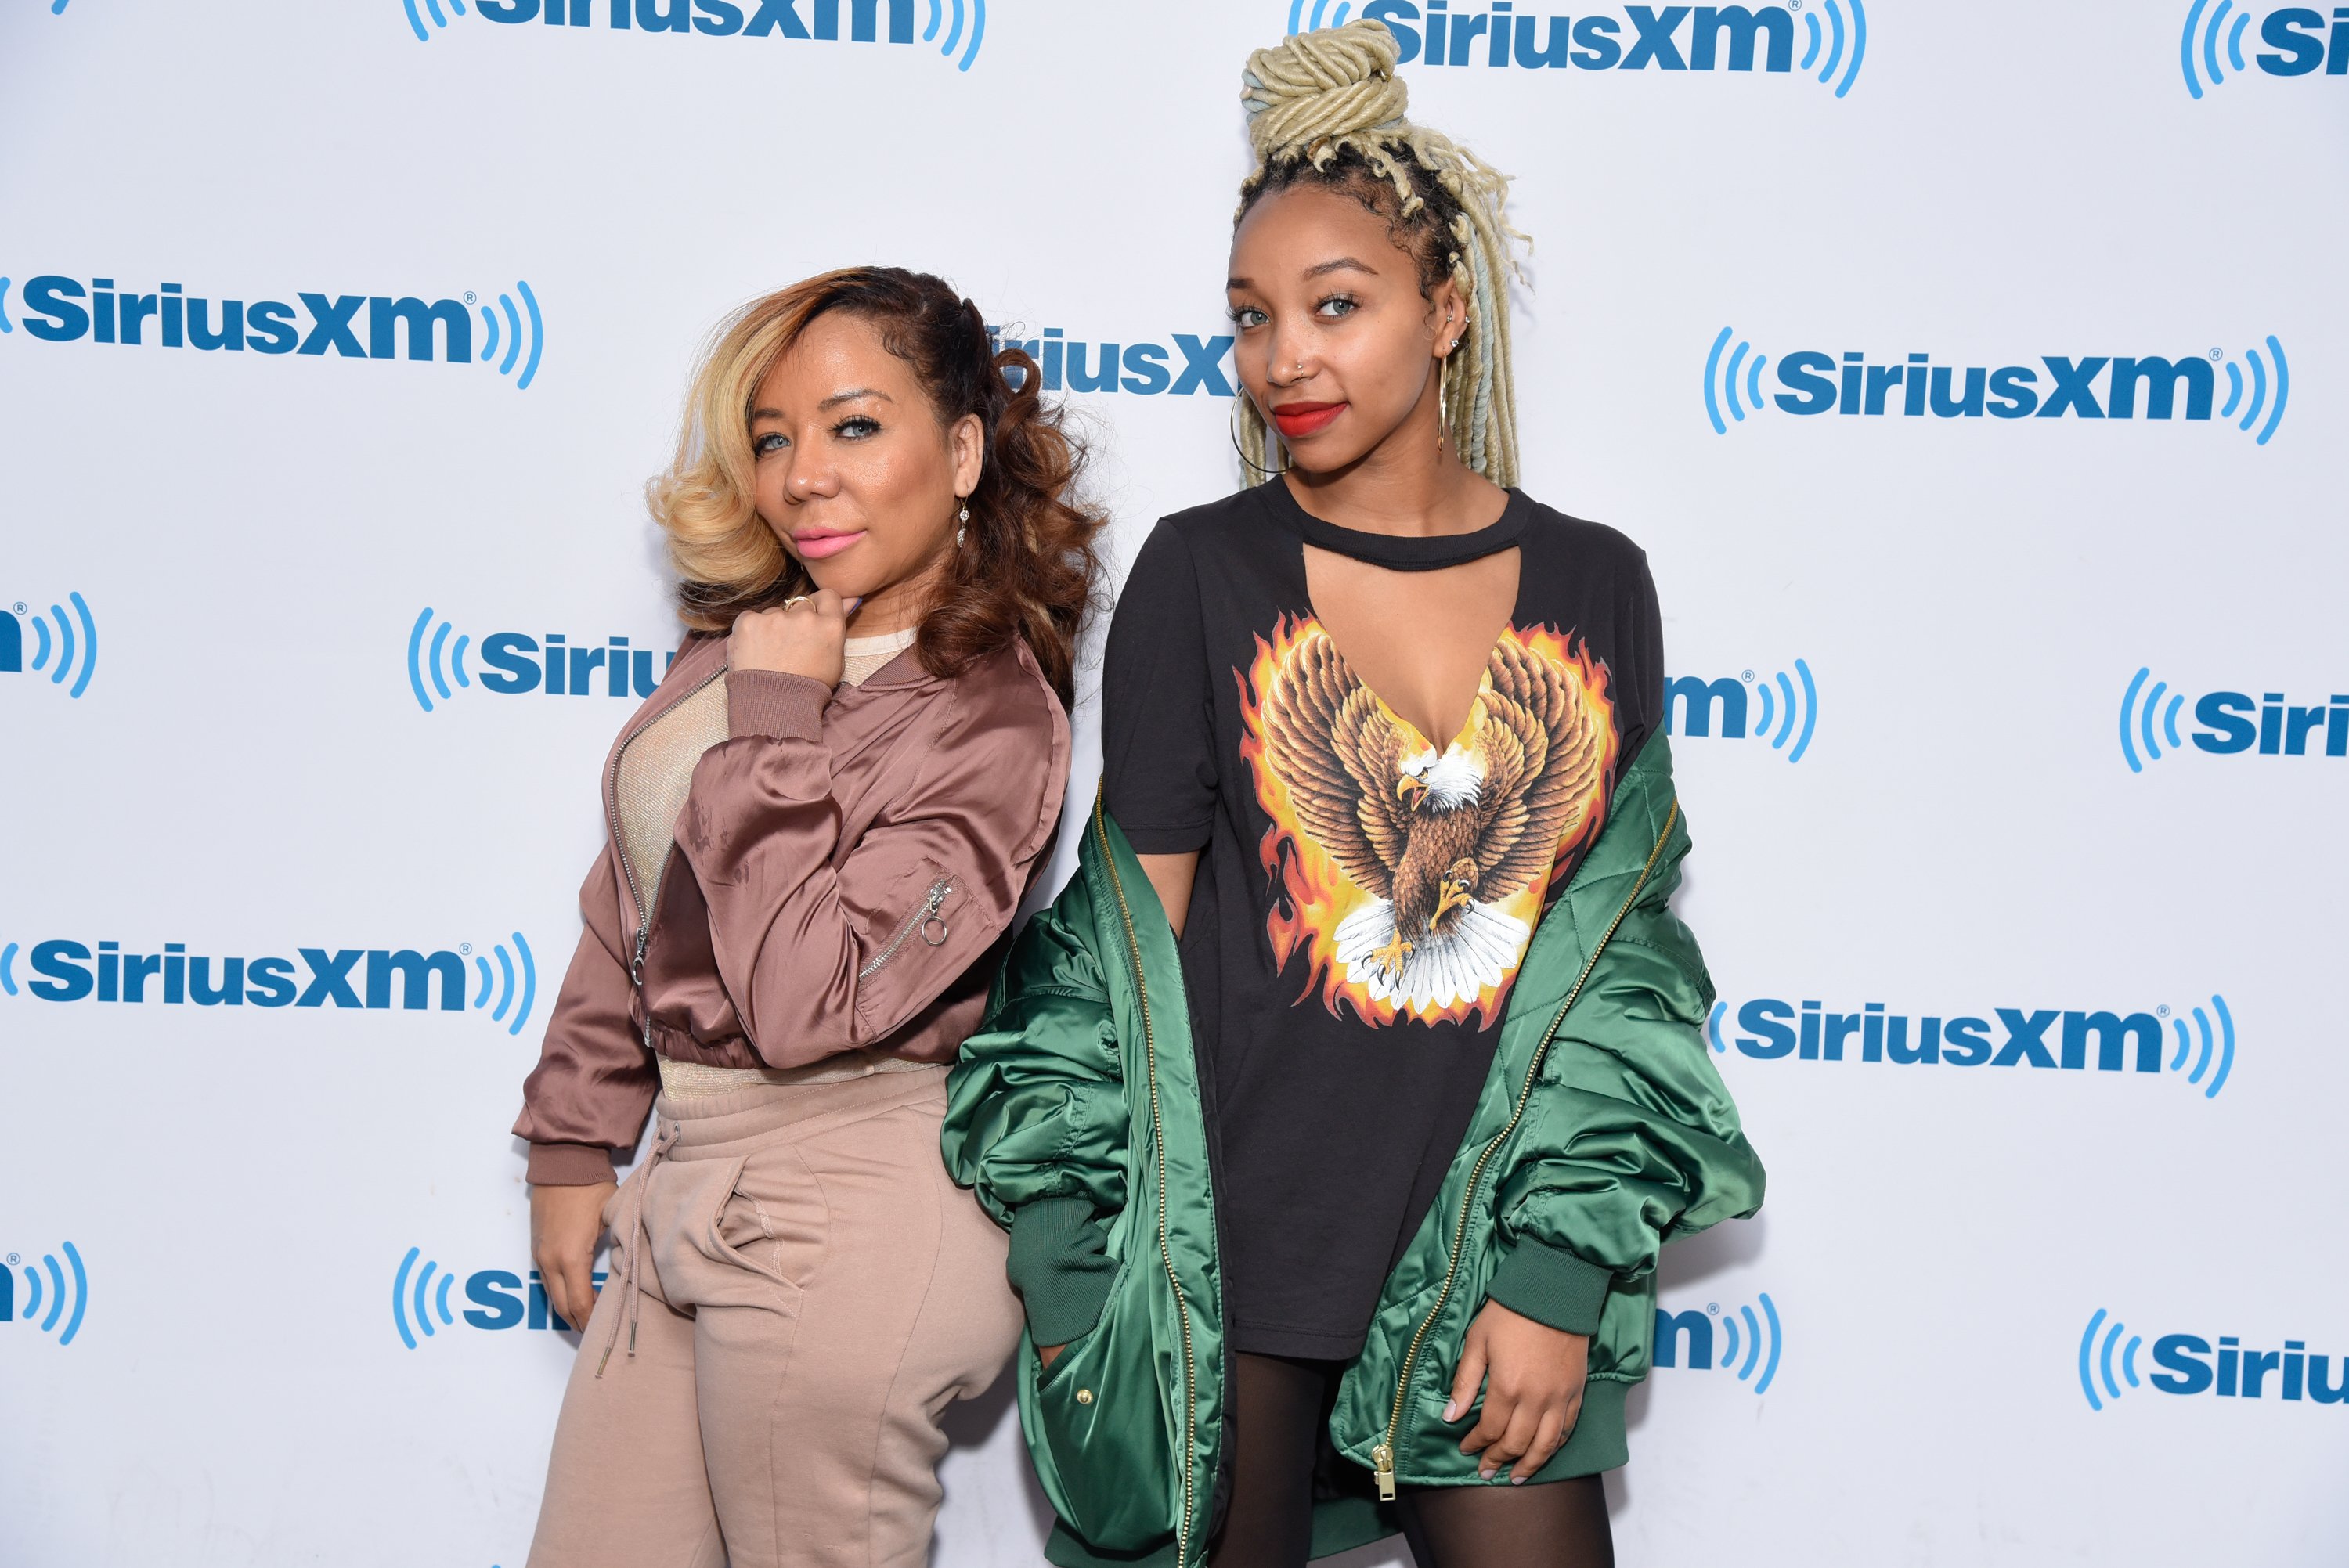 Tameka "Tiny" Harris and Zonnique Jailee Pullins visit SiriusXM Studios on April 19, 2017 | Photo: GettyImages